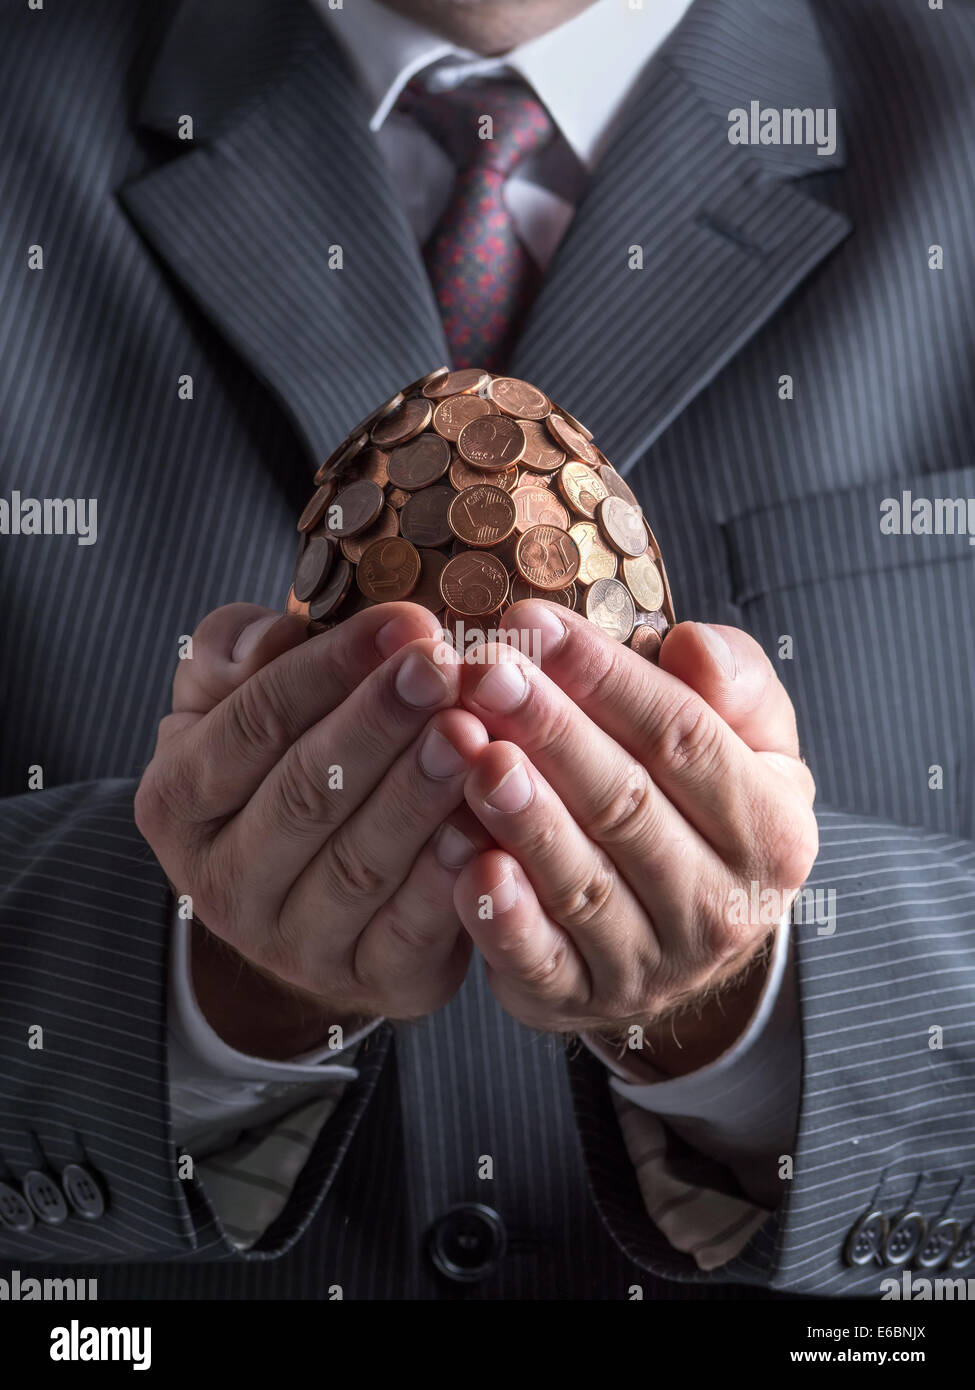 Businessman wearing suit holding one eurocent egg in his hands Stock Photo